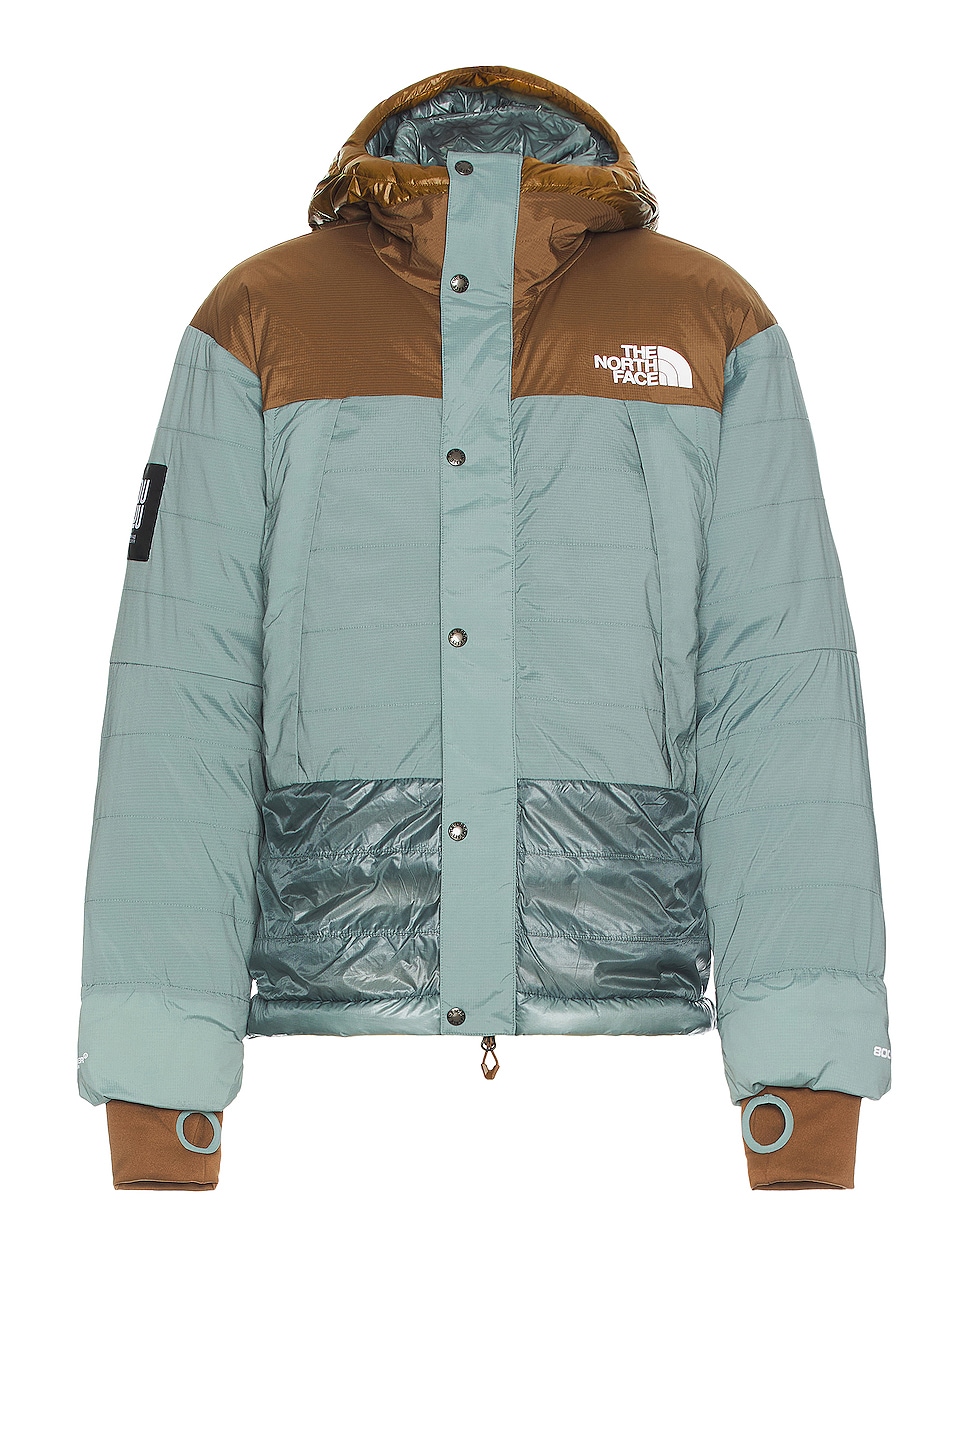 Image 1 of The North Face X Project U 50/50 Mountain Jacket in Concrete Grey & Sepia Brown